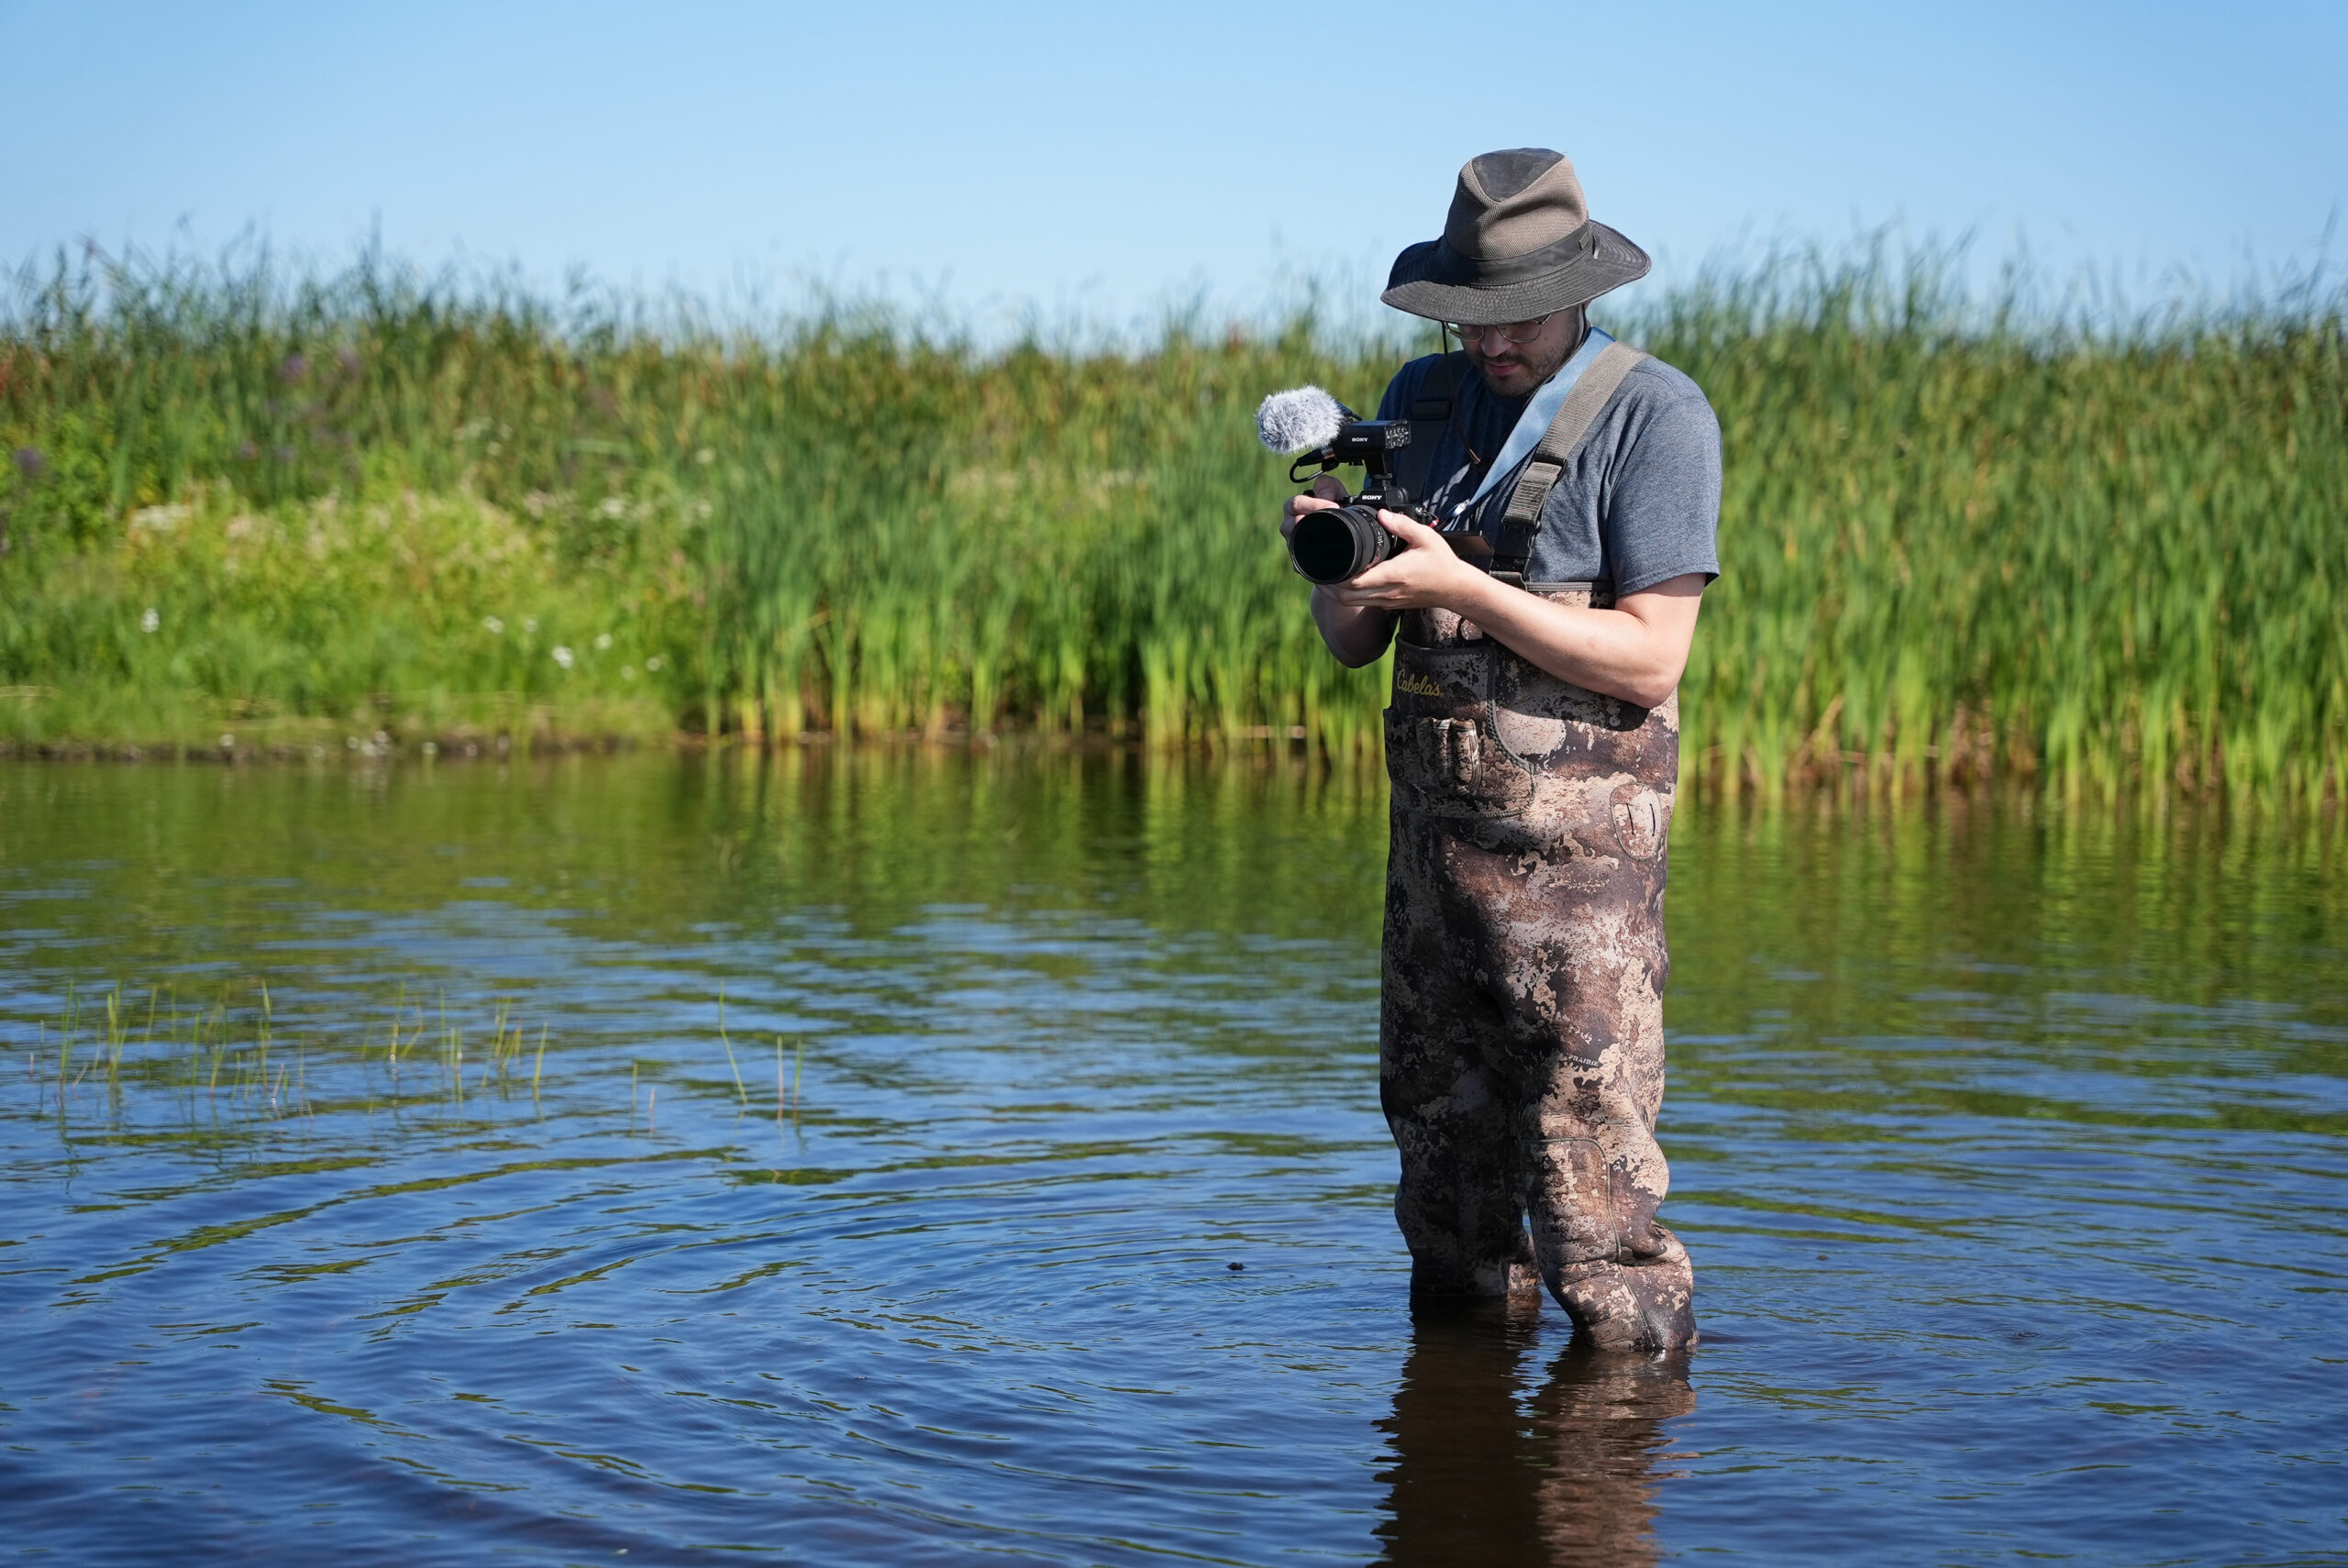 Jeremy Van Mill stands in waders in a wetland, holding a camera.